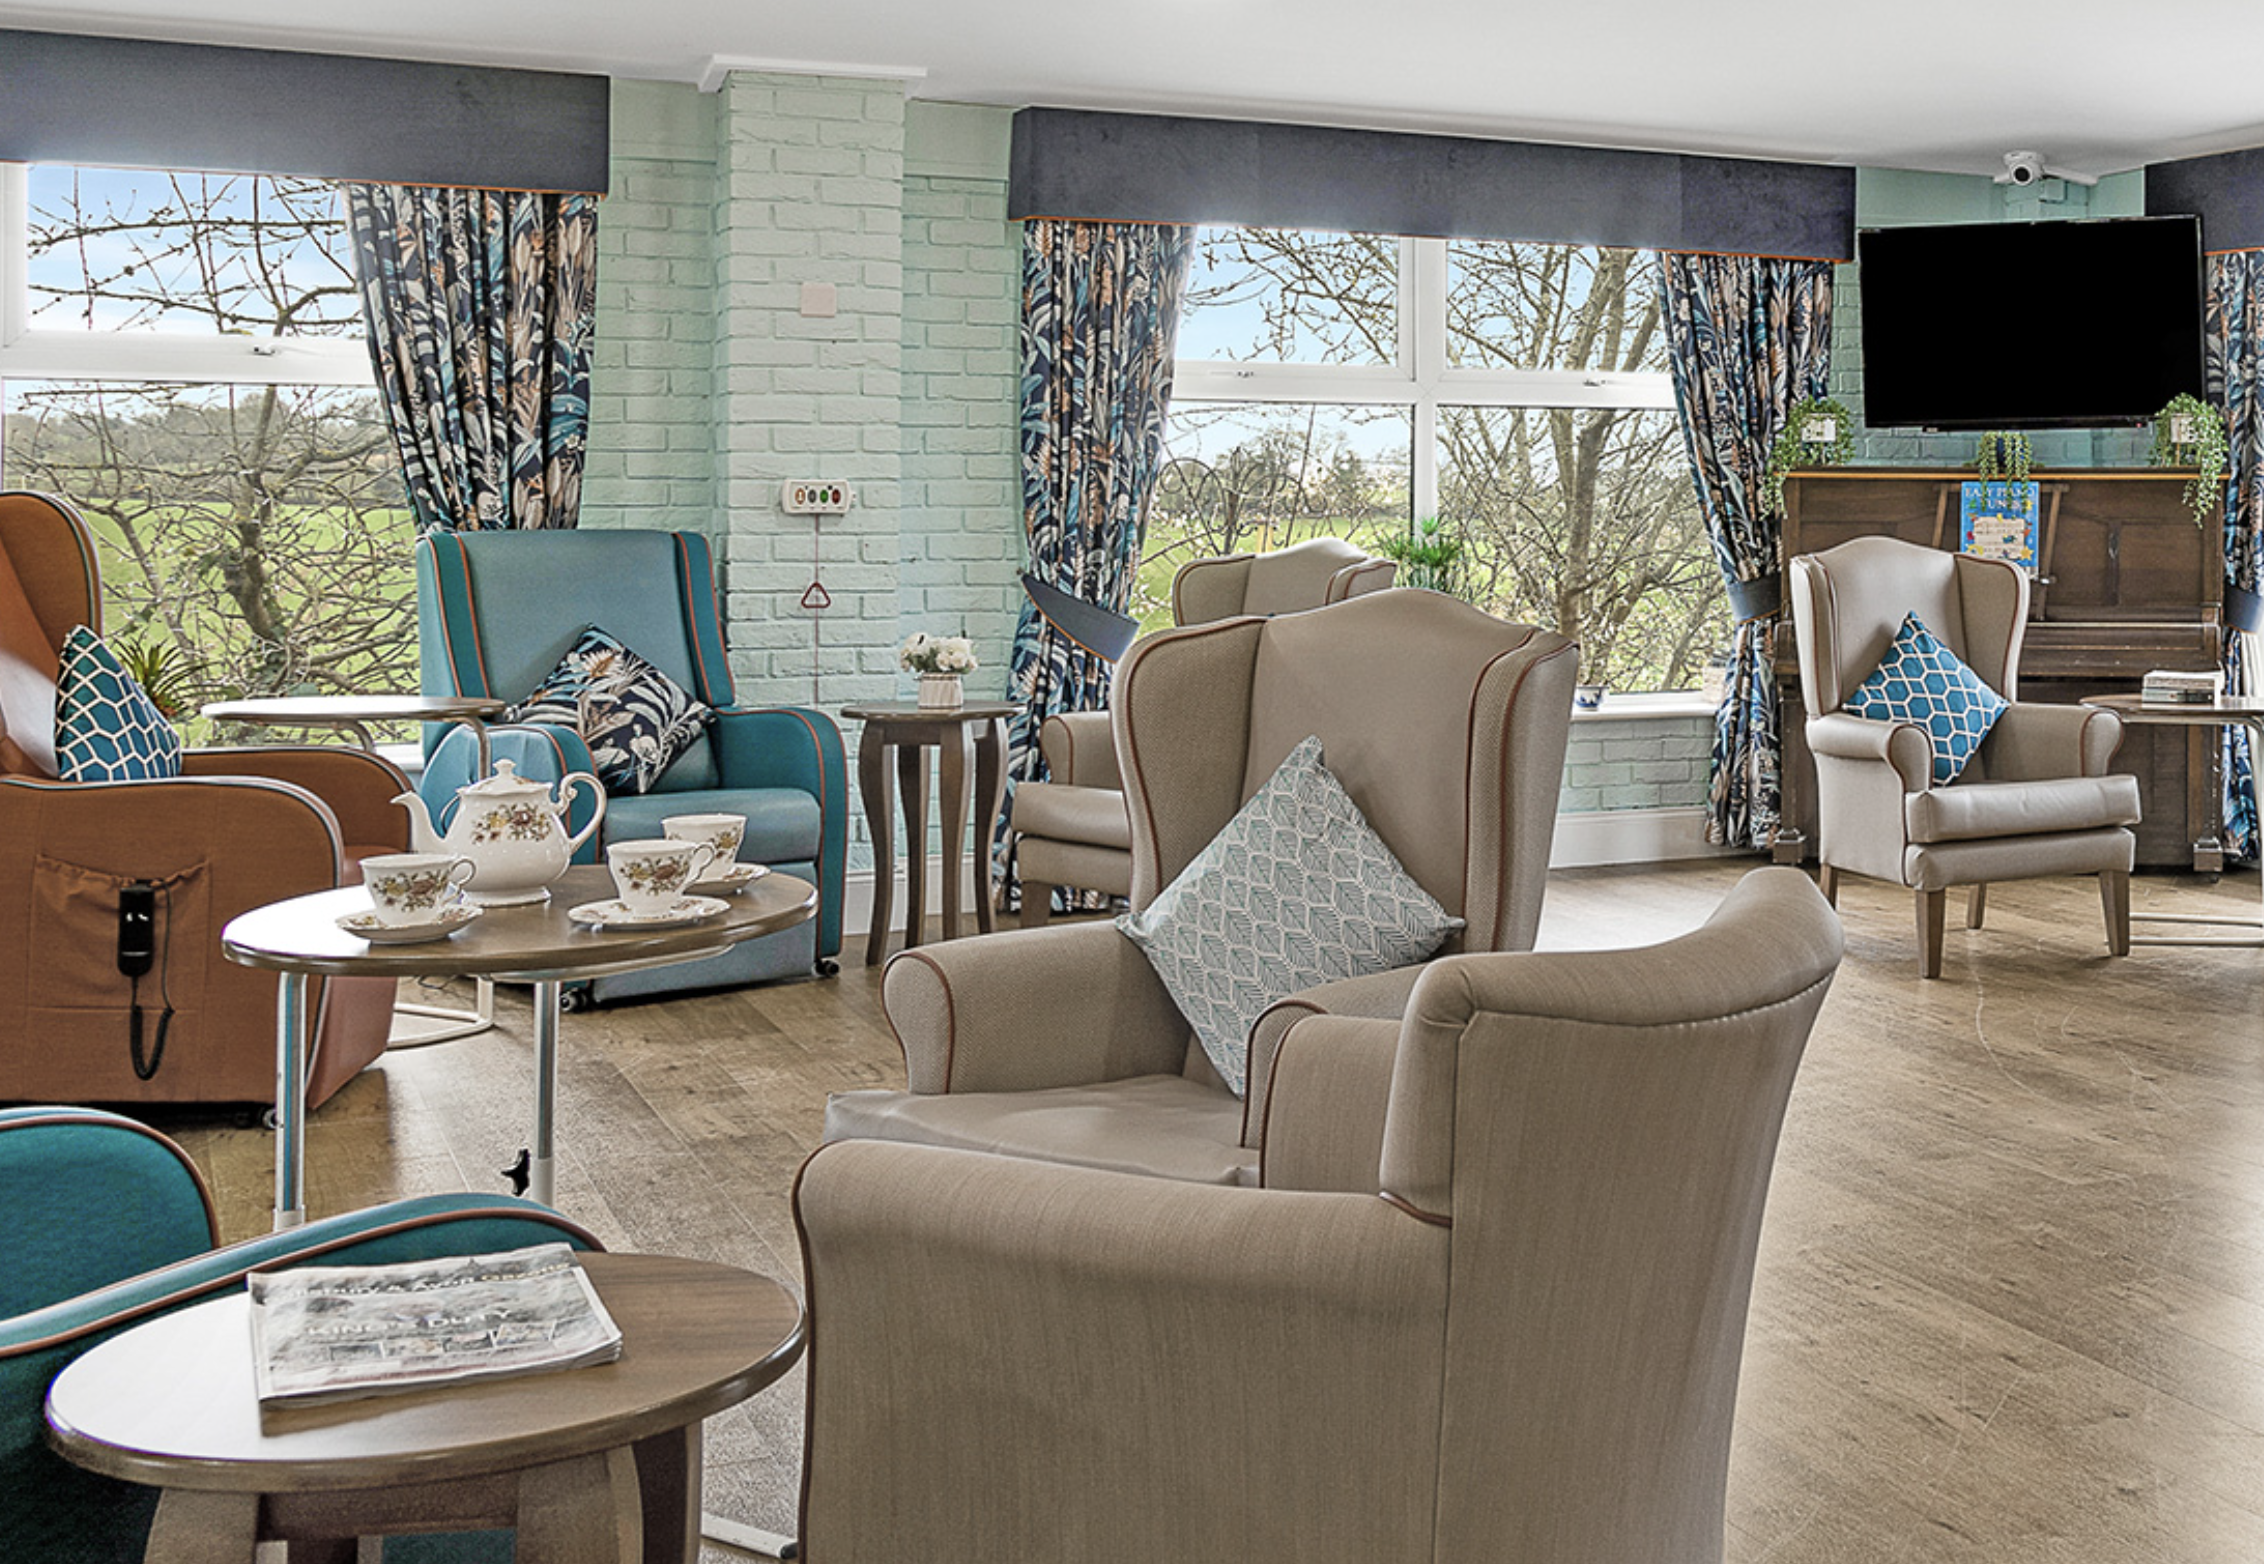 Lounge of Ashley Grange care home in Downton, Wiltshire